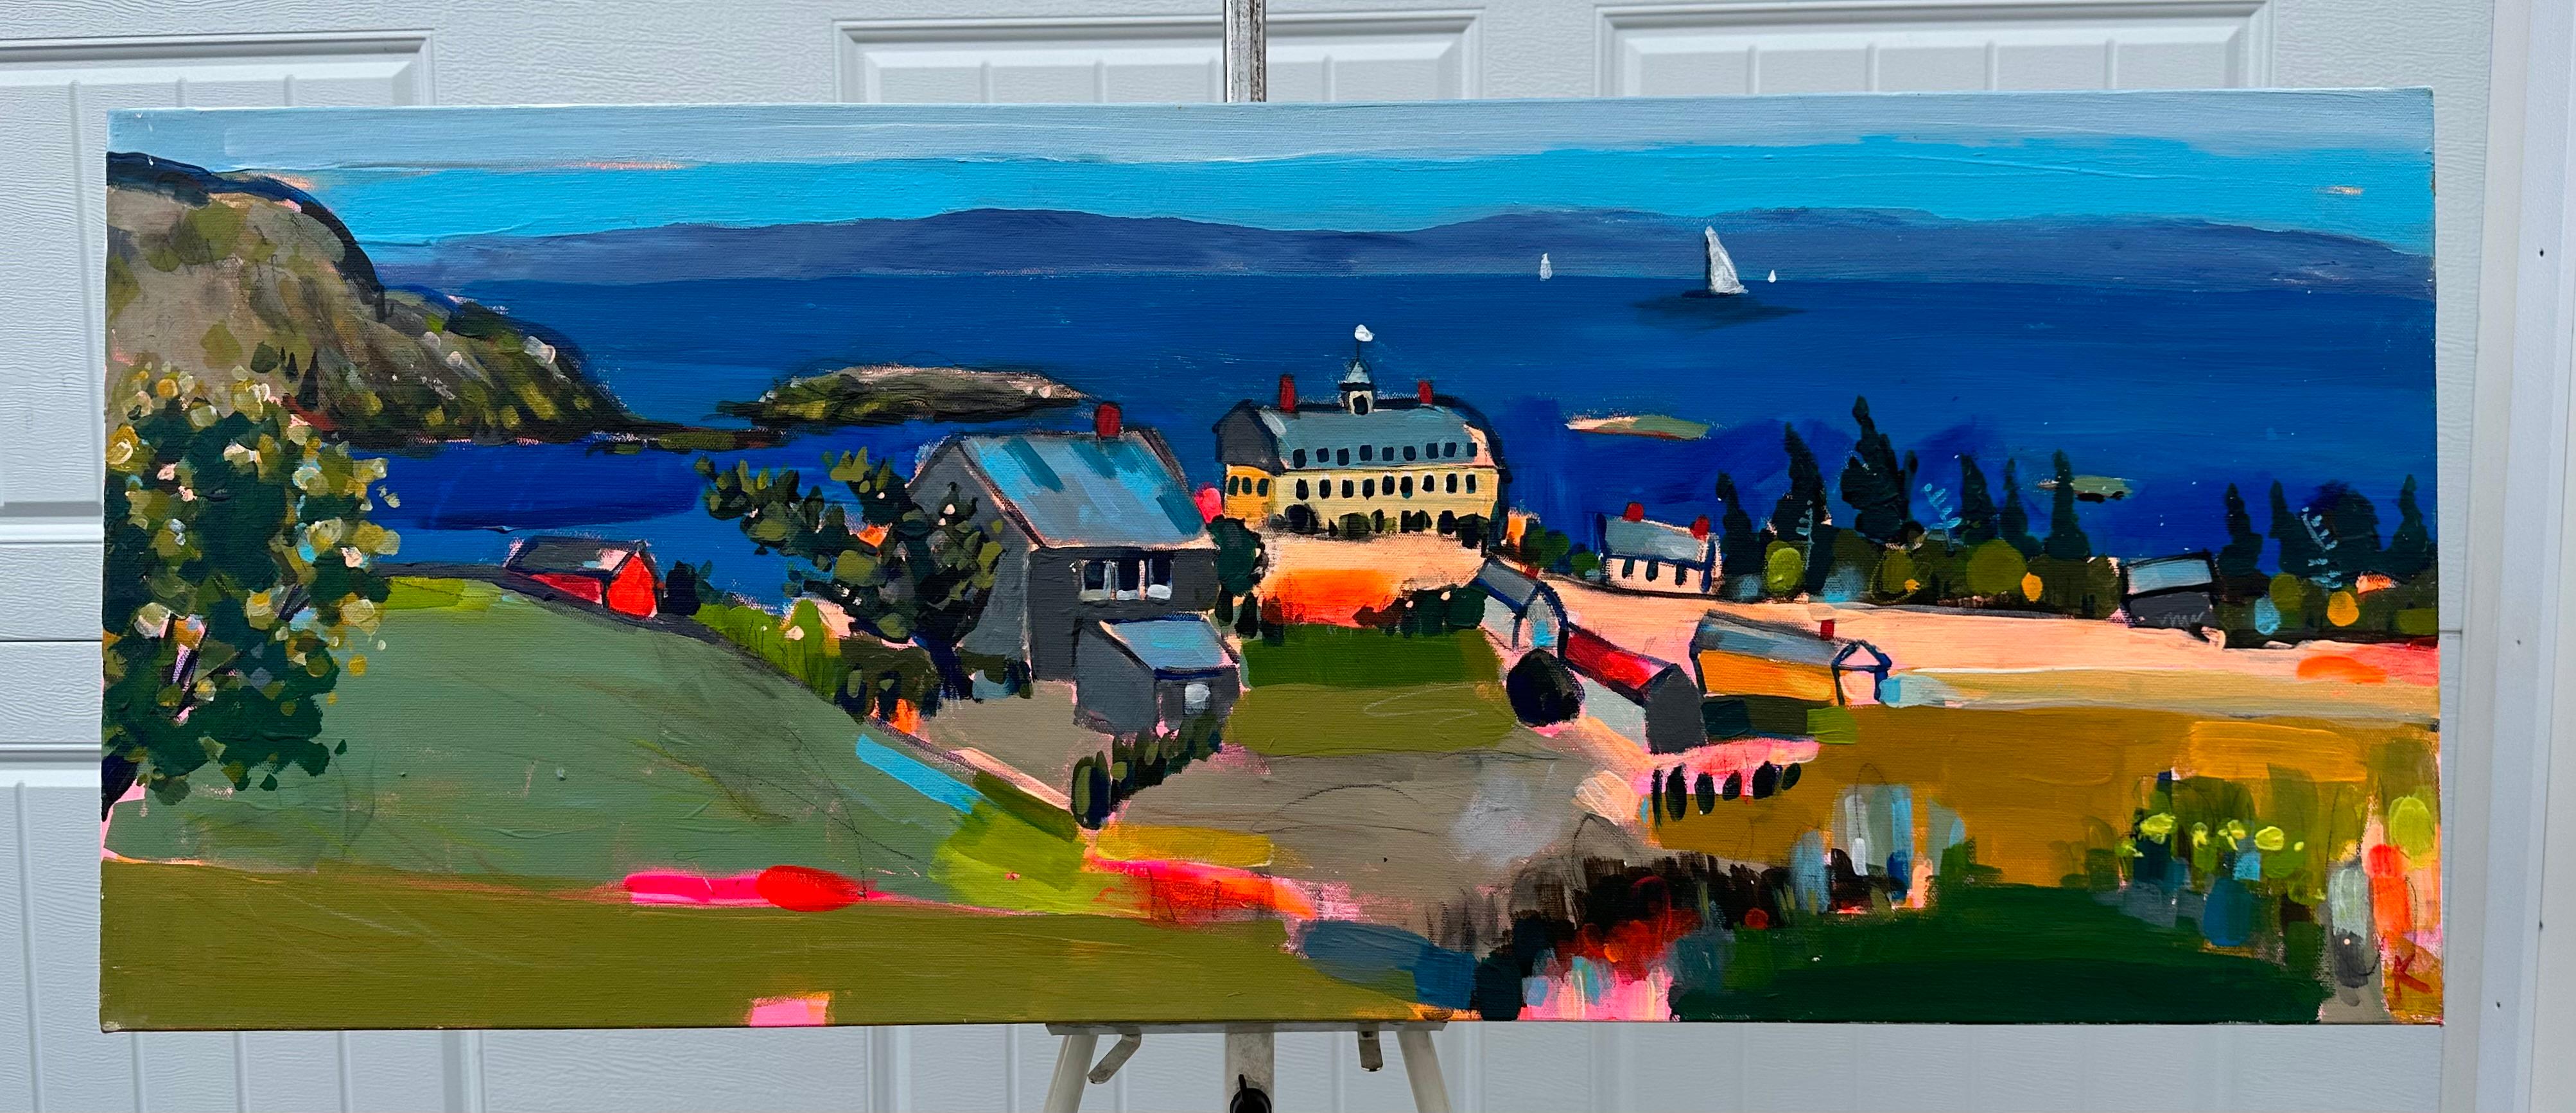 A Day on Monhegan Island, Original Painting - Abstract Expressionist Art by Rebecca Klementovich